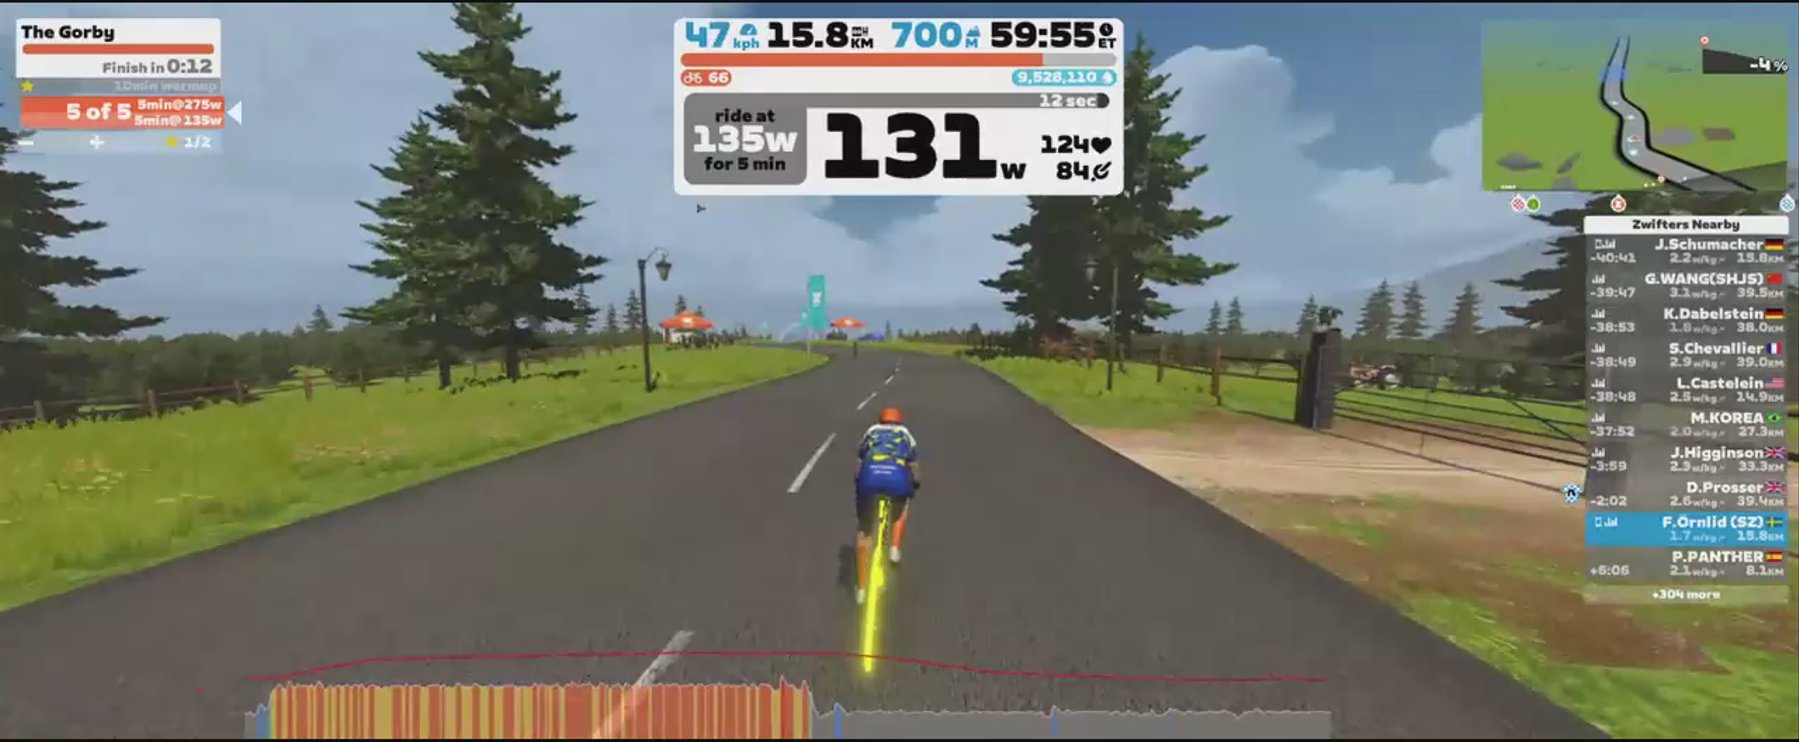 Zwift - The Gorby in France